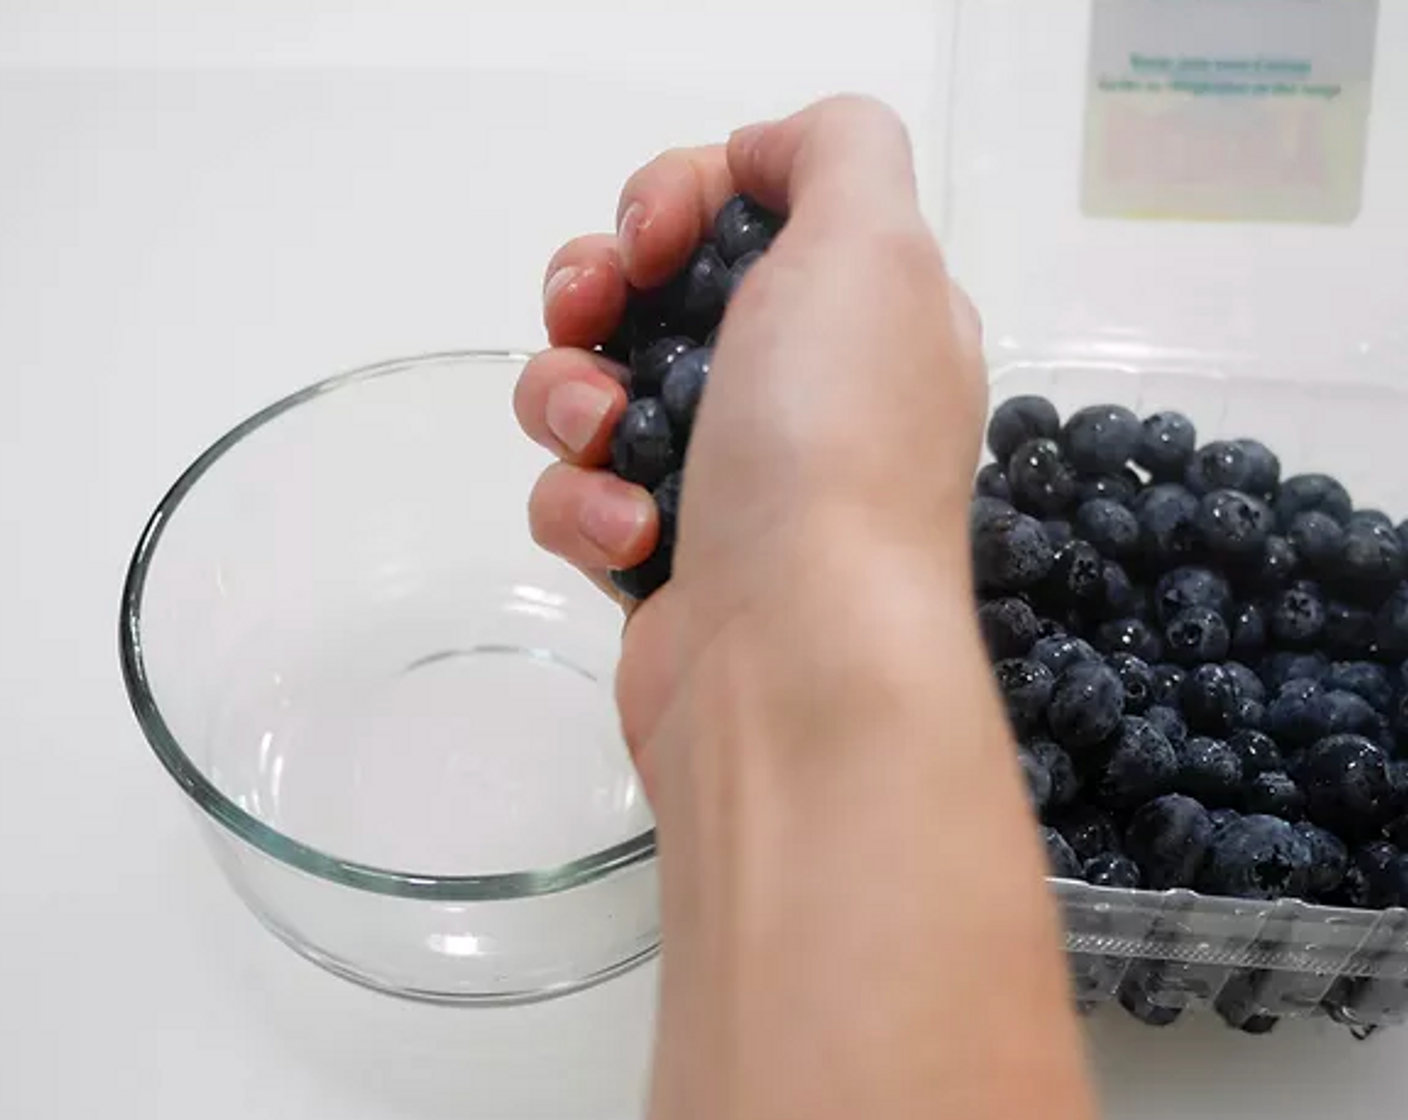 step 1 Place the Fresh Blueberries (2 handfuls) into a bowl.